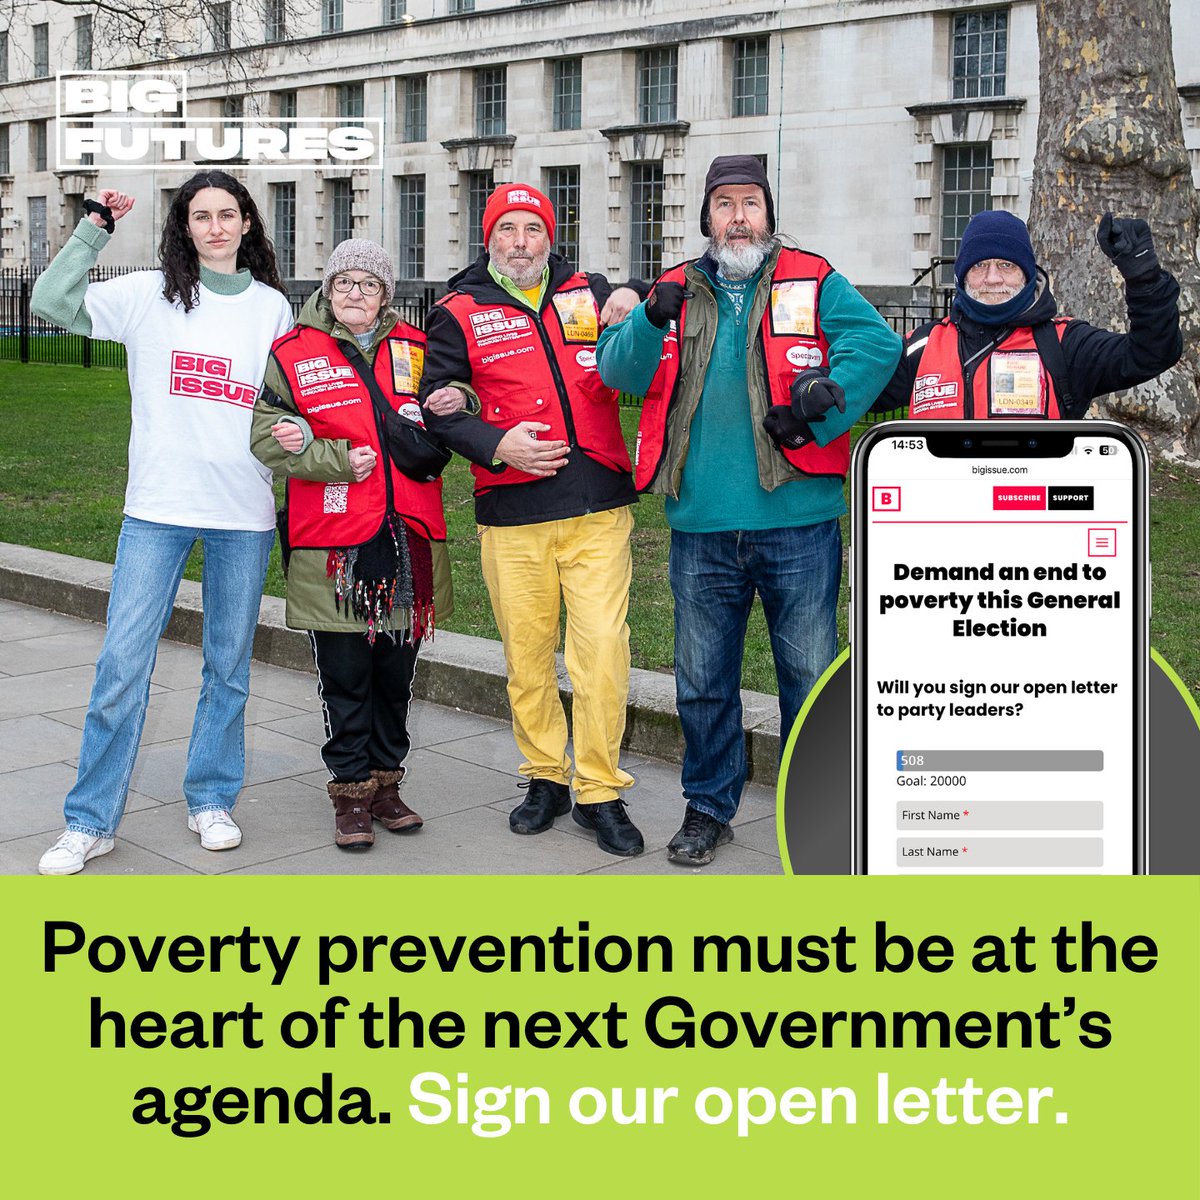 ✉️ BIG Announcement! Join Us in Demanding an End to Poverty this #GeneralElection! ✊ Big Issue's open letter calls on party leaders to take decisive action to end poverty in the UK. Will you stand with us and sign this crucial letter? ✍️ bit.ly/3JR2Io0